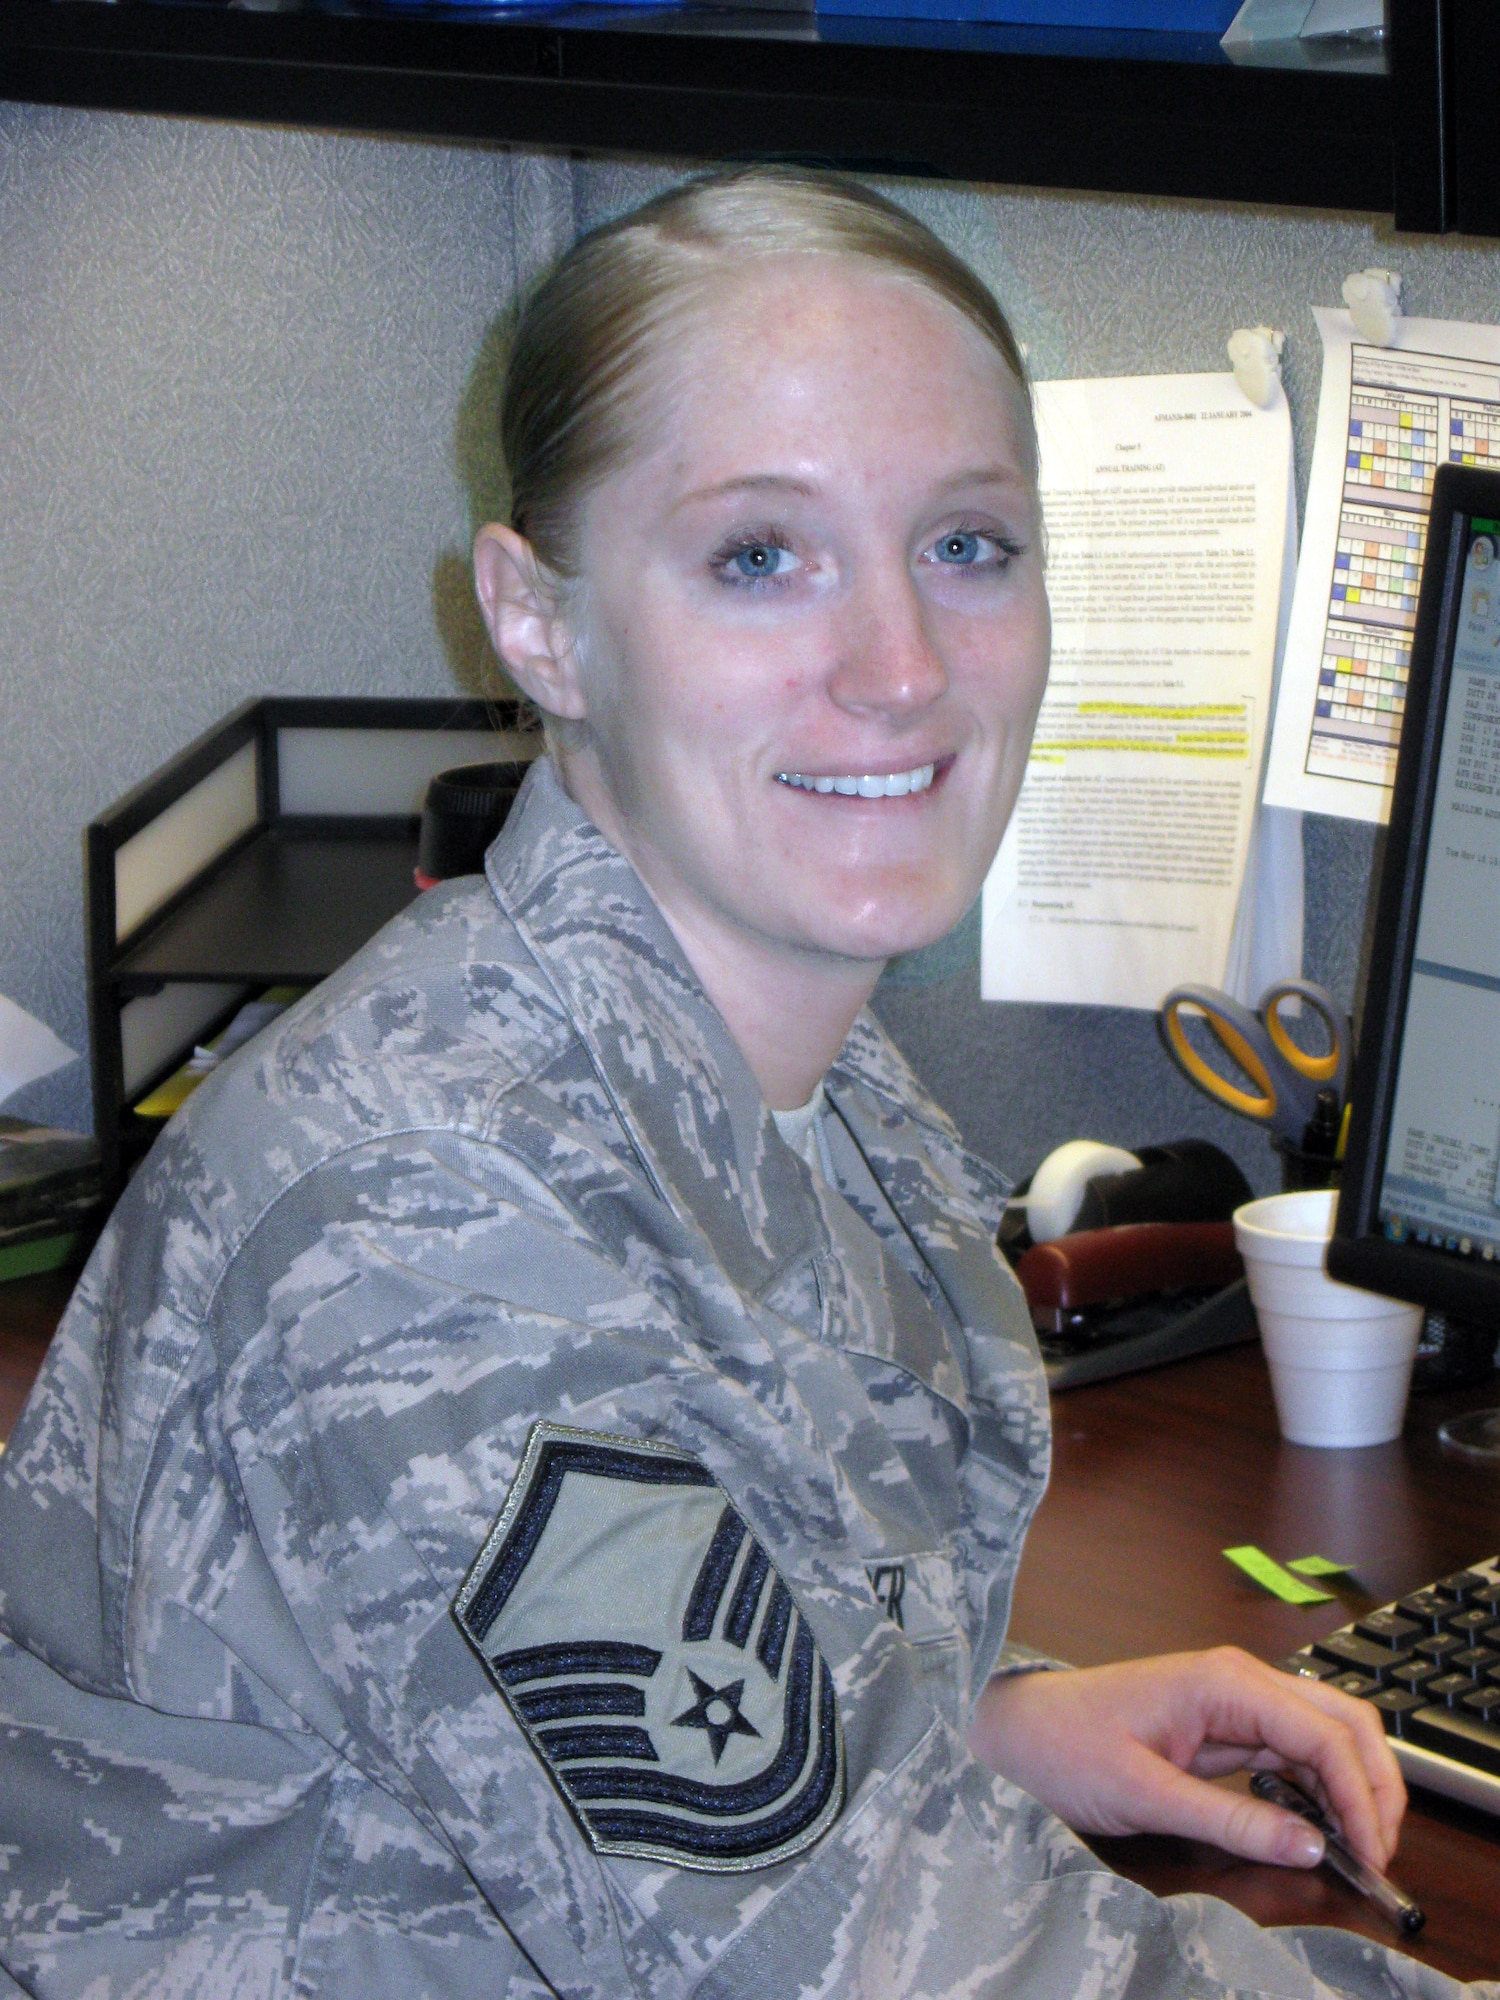 Master Sgt. Melanie Singer, 706th Fighter Squadron noncommissioned officer in charge of knowledge operations, was awarded Senior NCO of the Half on February 11, 2009. Sergeant Singer is responsible for performing commander support staff functions for the 45 members of the 706th FS and 926th GP staff here.